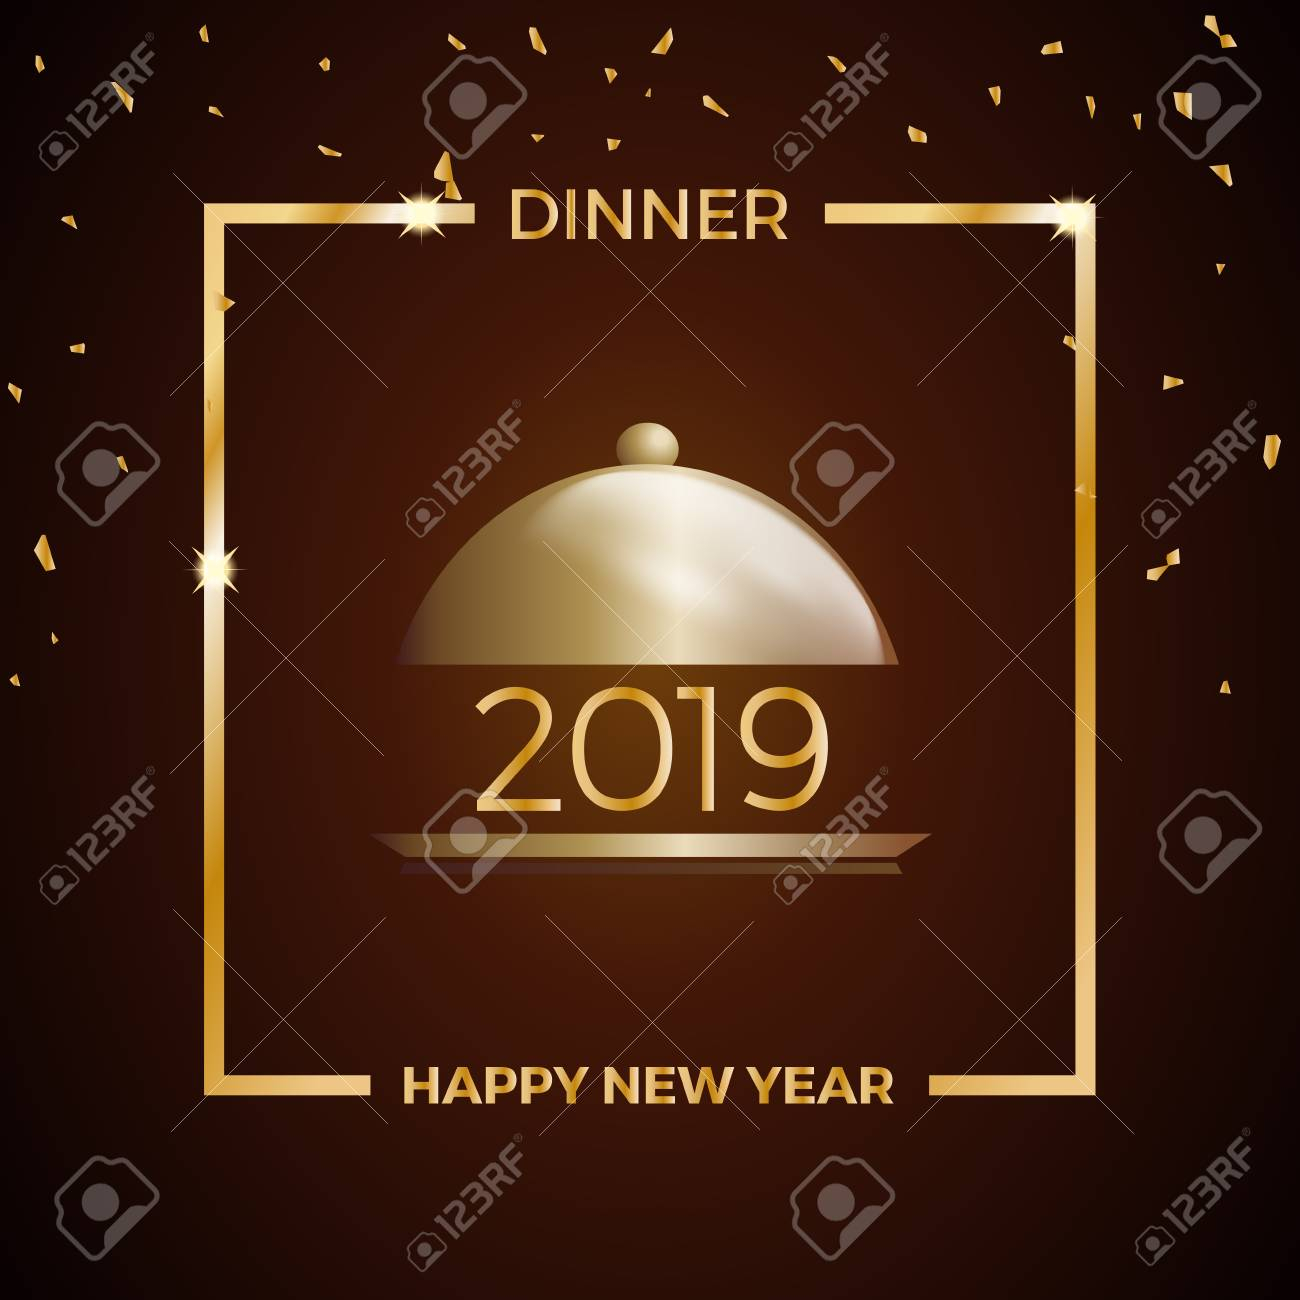 2019, New Year's Eve Dinner, Template For Poster, Cover And Menu Intended For New Years Eve Menu Template